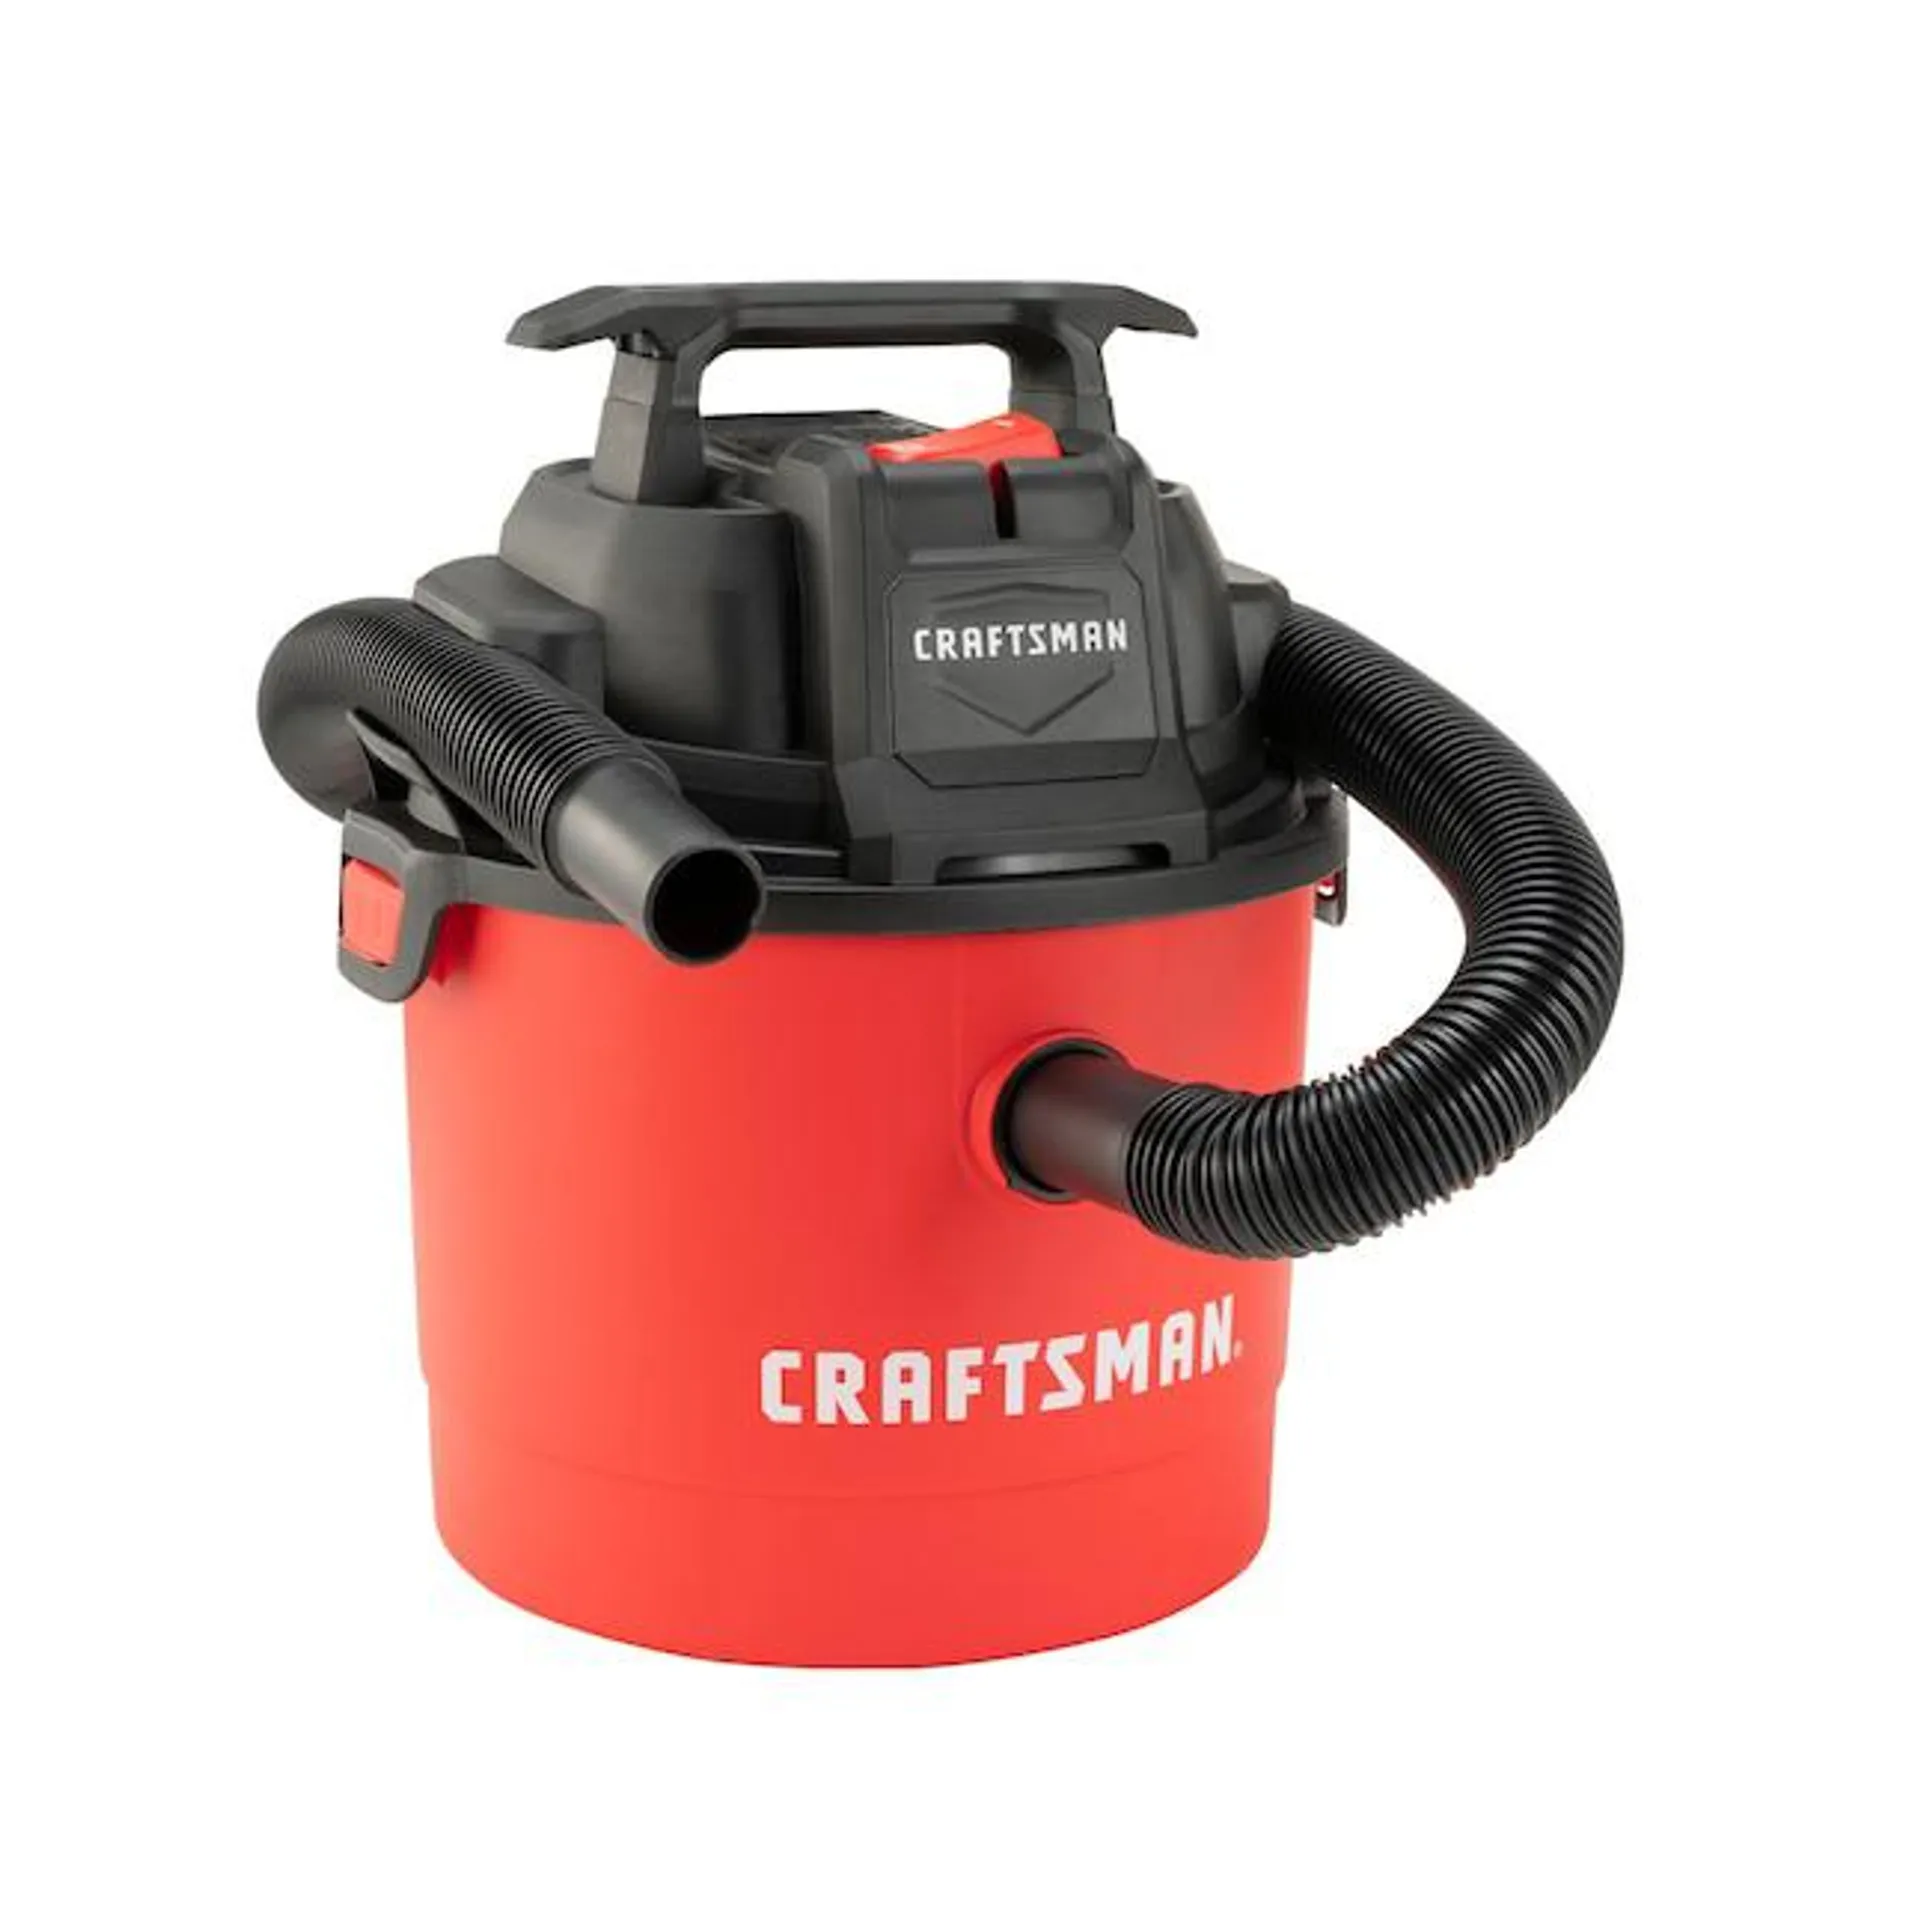 CRAFTSMAN 2.5-Gallons 2-HP Corded Wet/Dry Shop Vacuum with Accessories Included